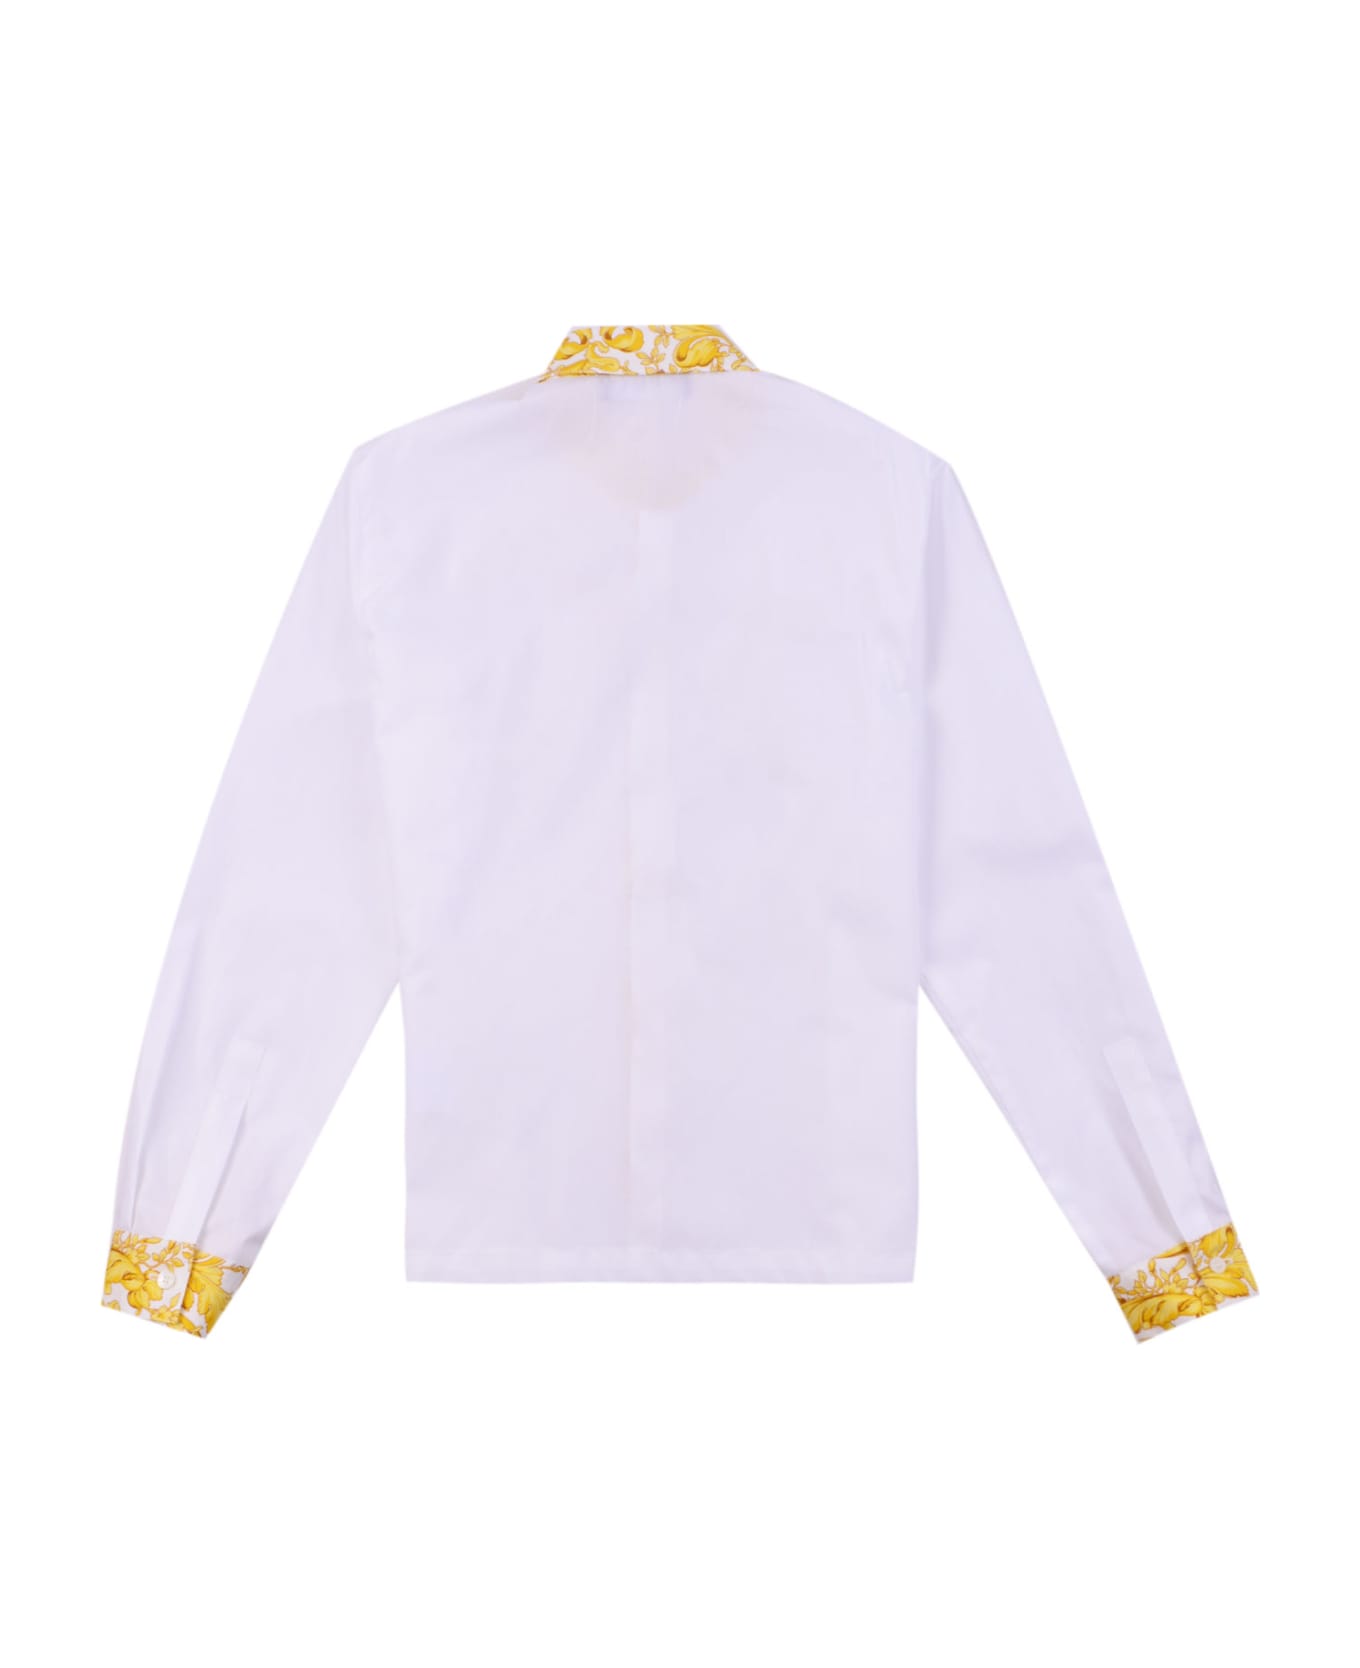 Versace Shirt With Baroque Print - White